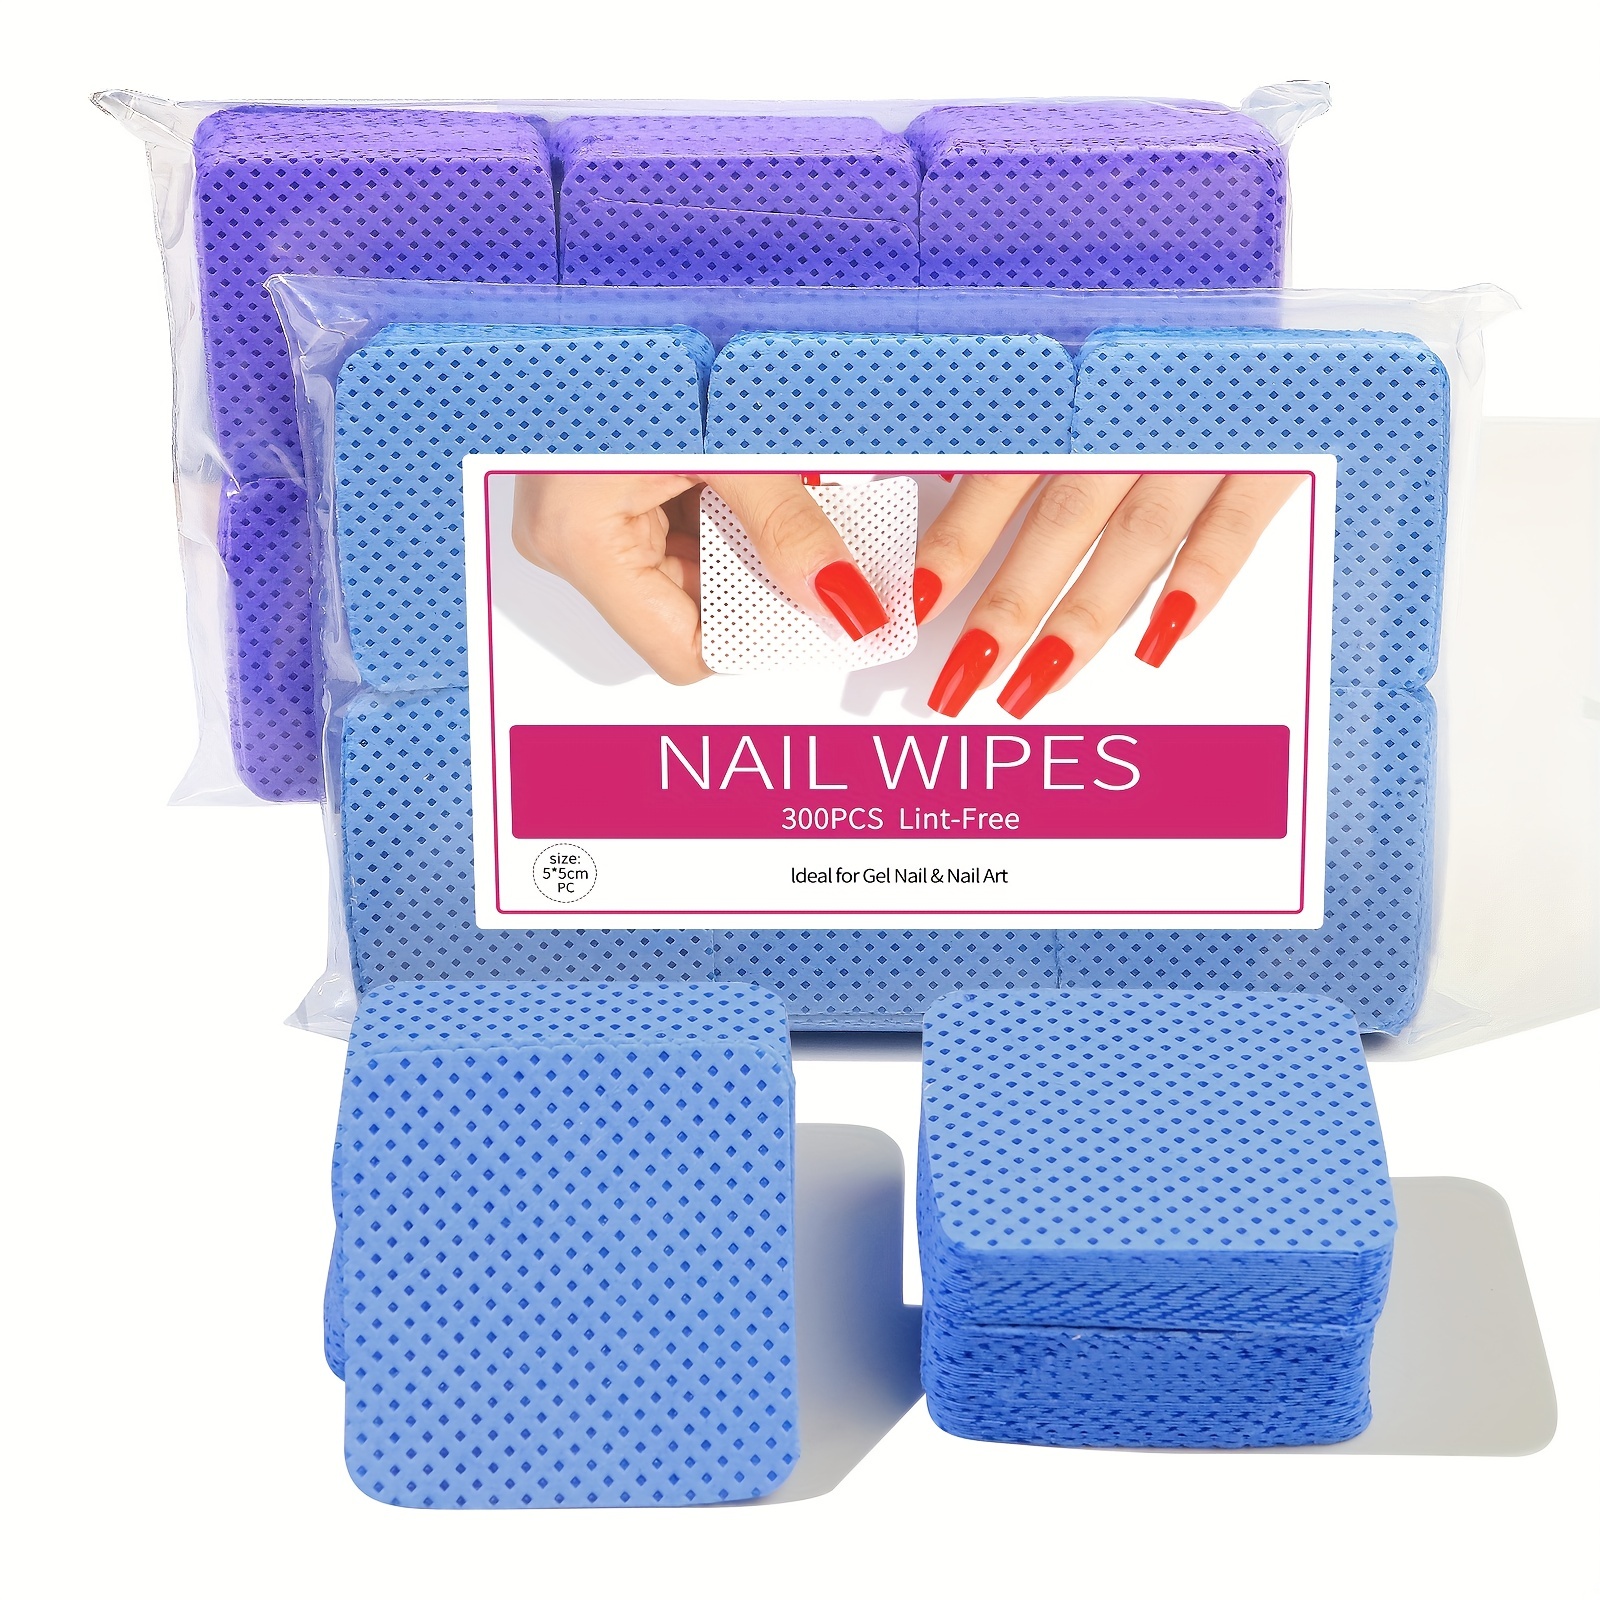 

300pcs Lint Free Nail Wipes, Soft Gel Nail Polish Remover Pads, Super Absorbent Eyelash Extension Glue Cleaning Wipes